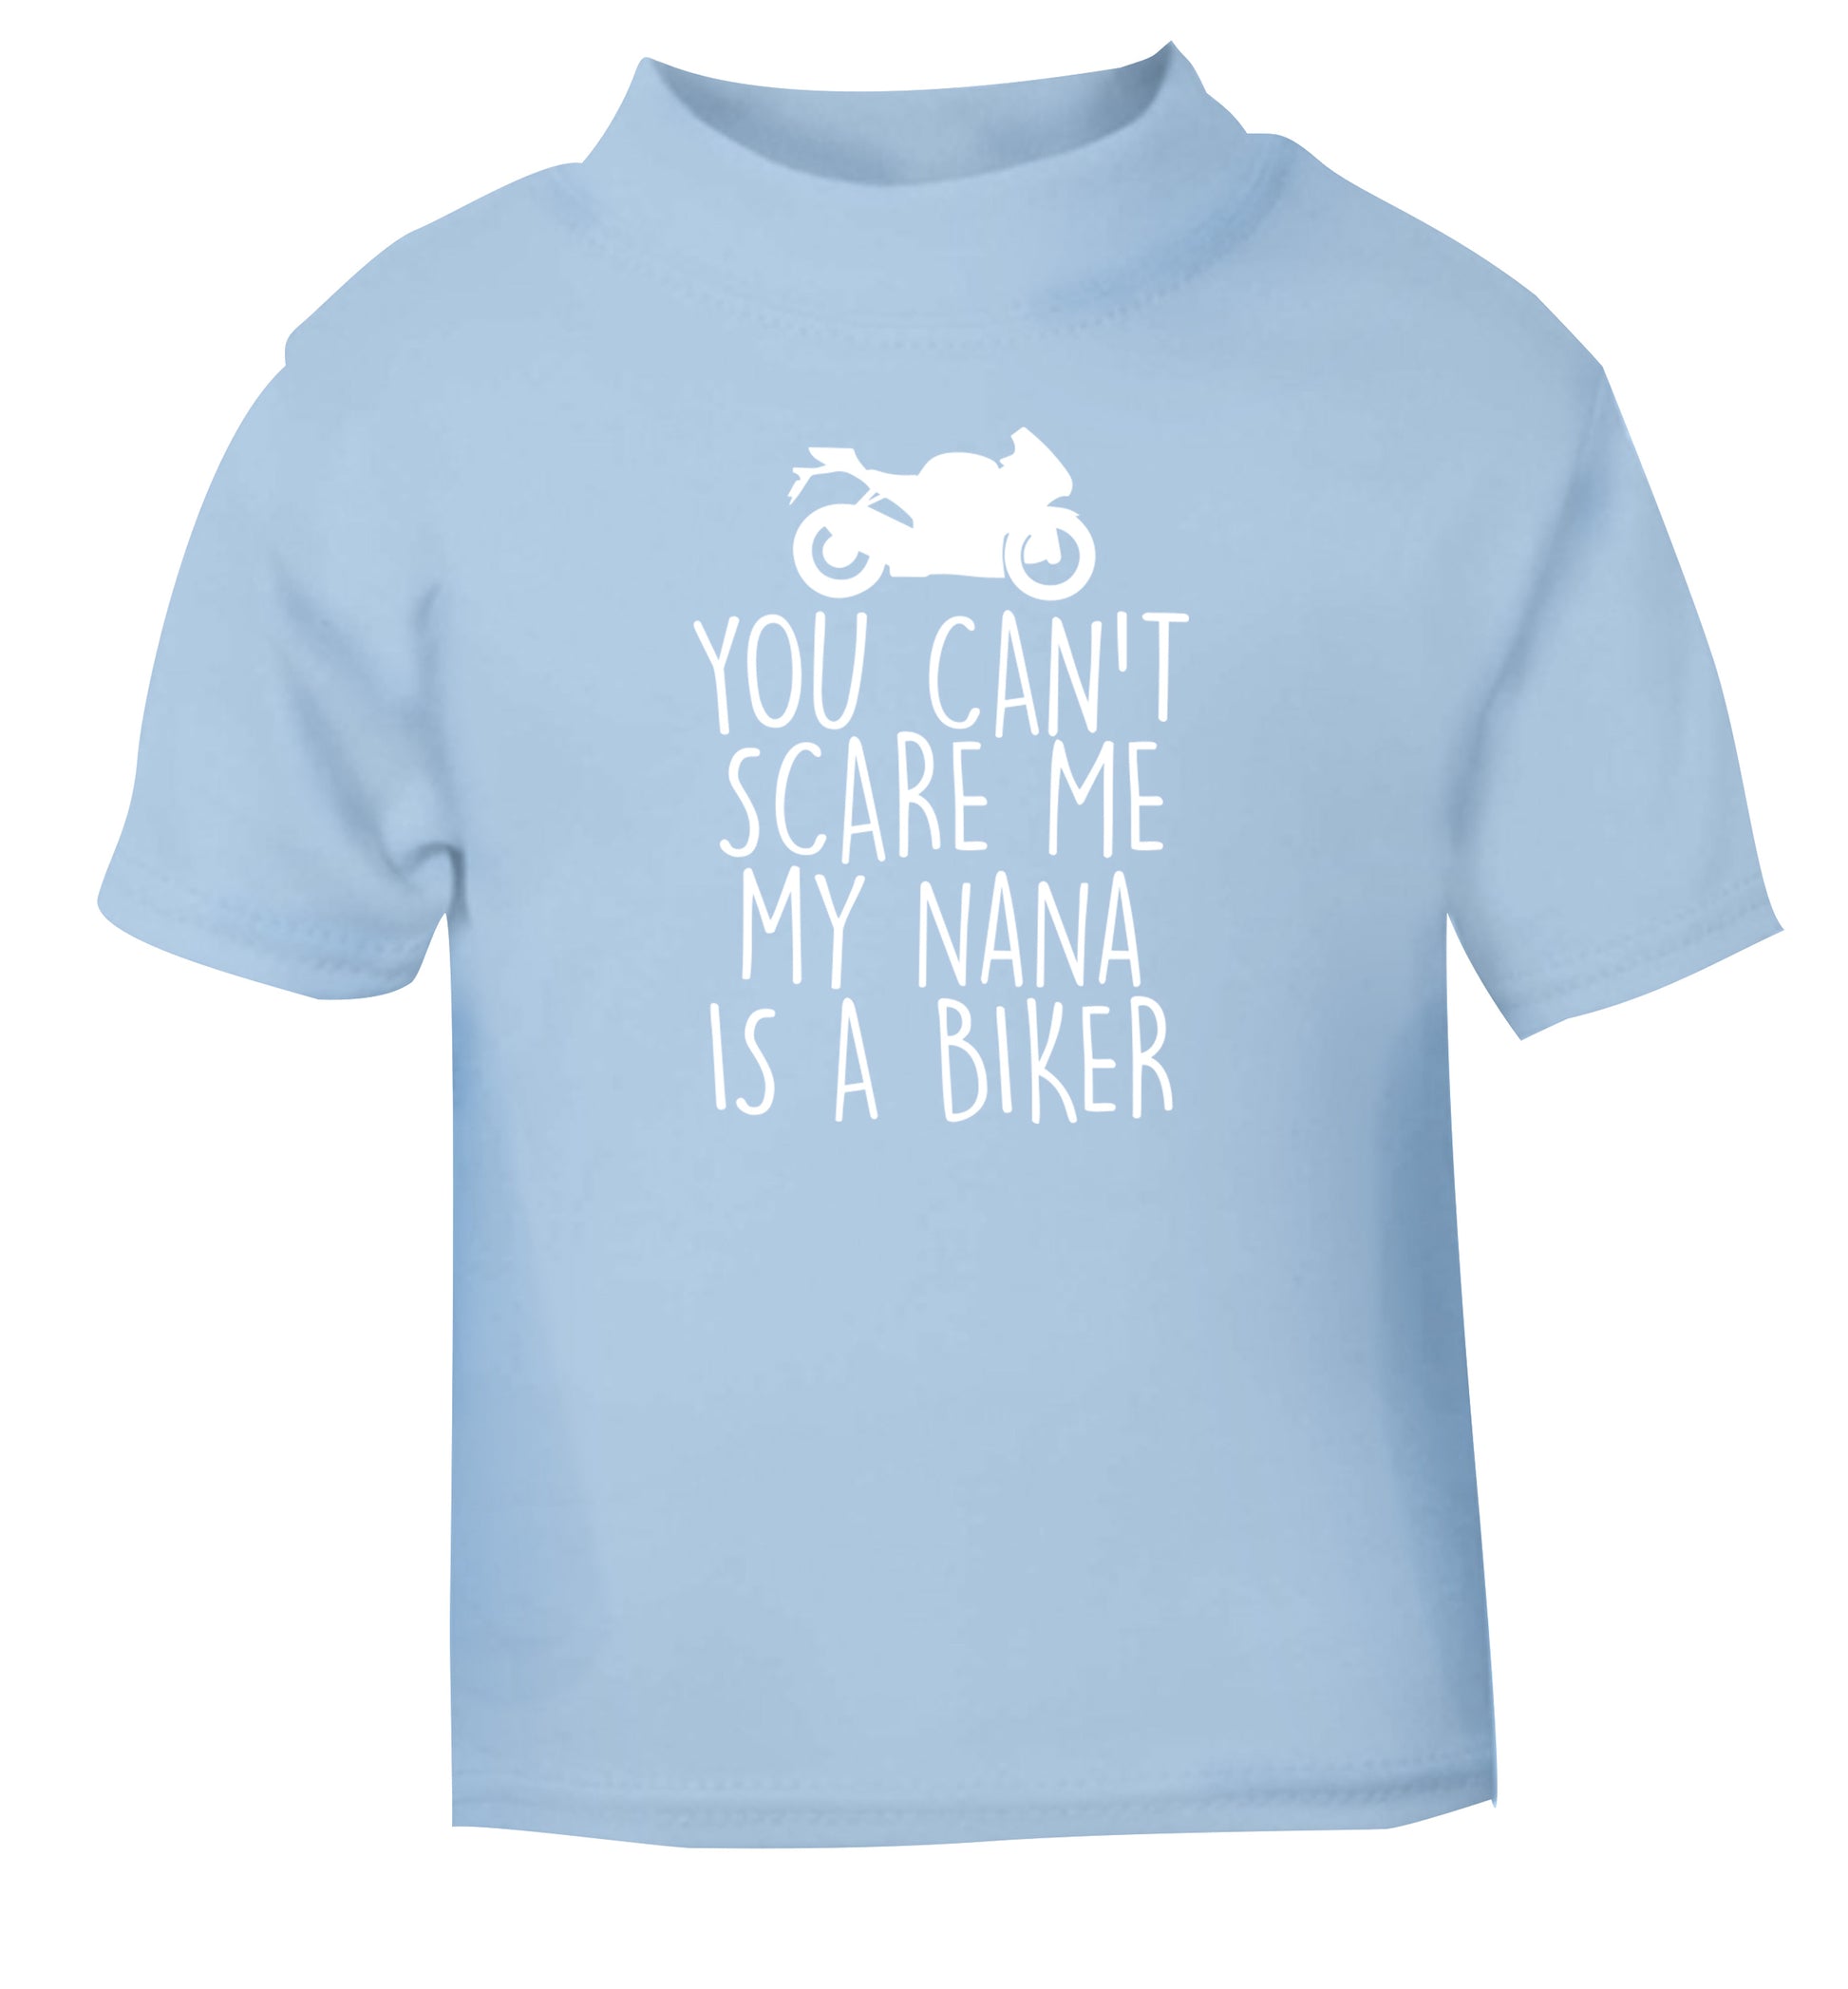 You can't scare me my nana is a biker light blue Baby Toddler Tshirt 2 Years